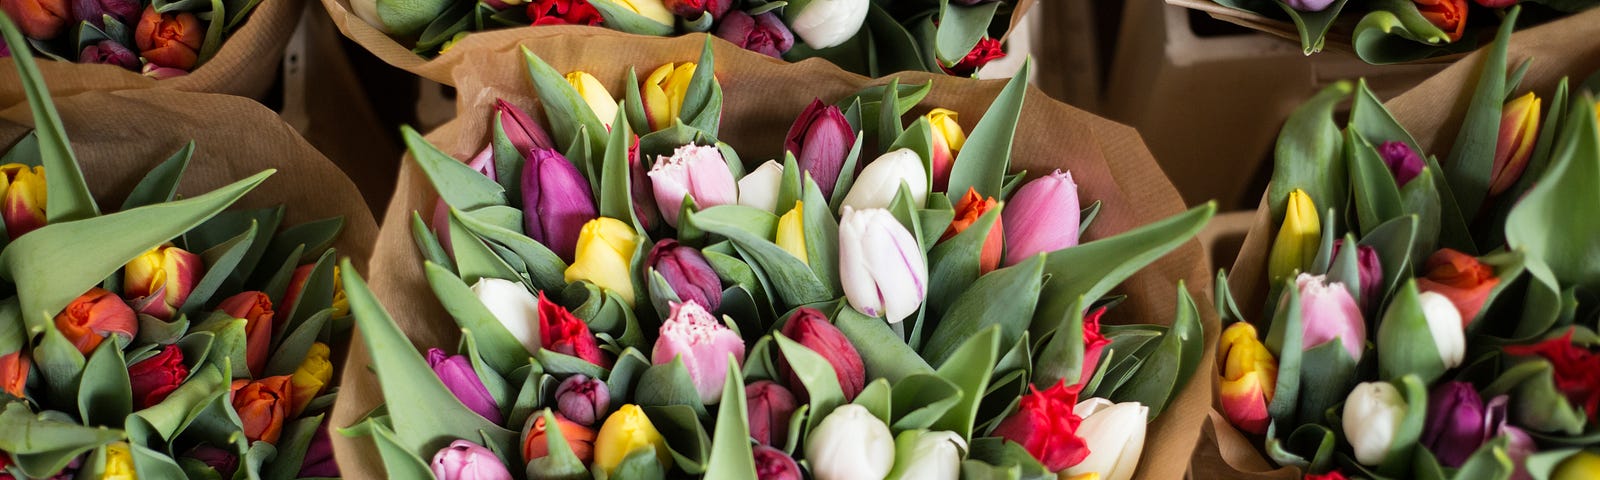 A large brown paper wrapped bouquet of colored tulips among a stall full of them.